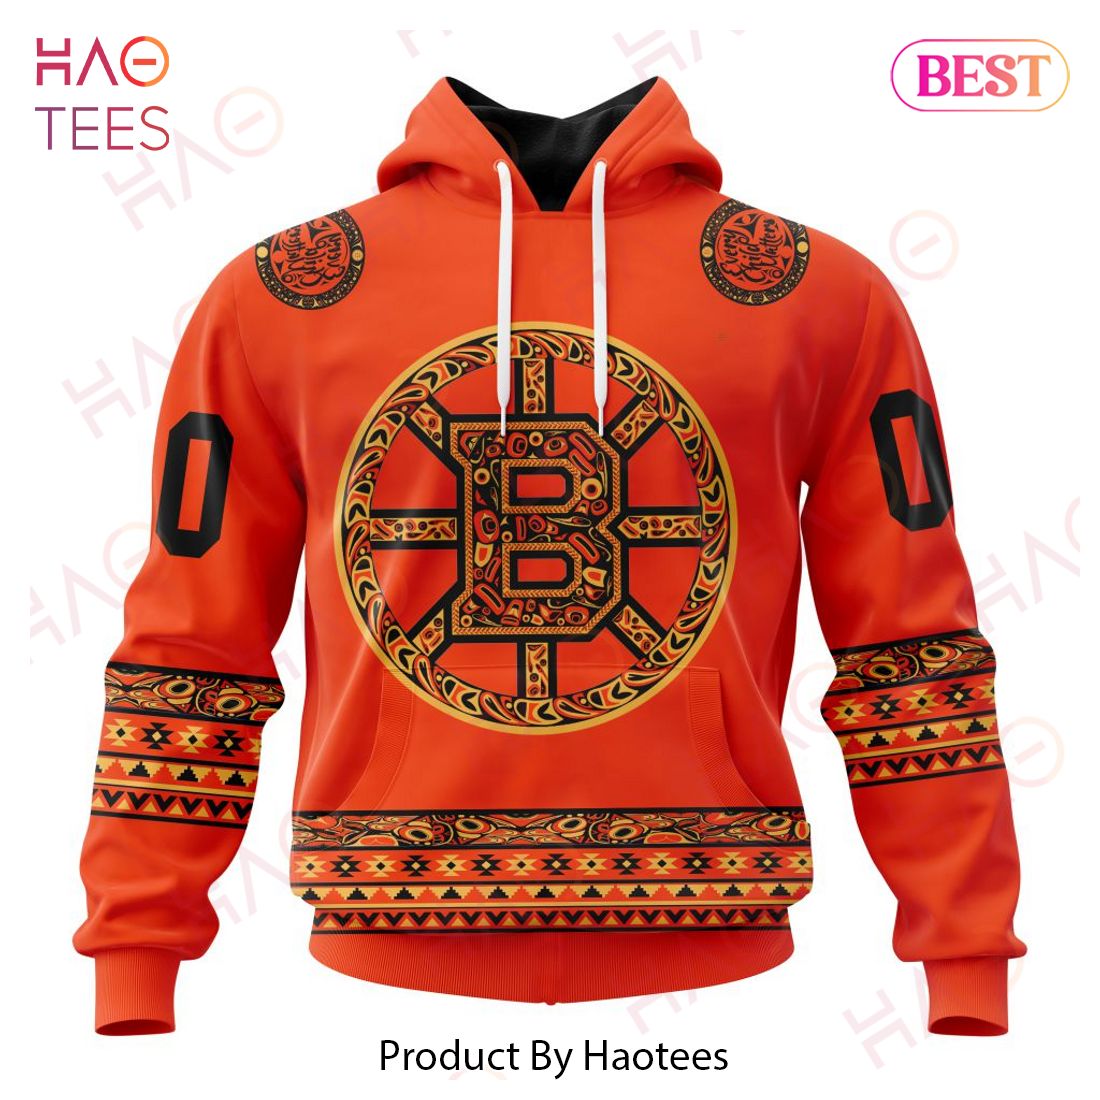 NHL Boston Bruins Specialized National Day For Truth And Reconciliation 3D Hoodie